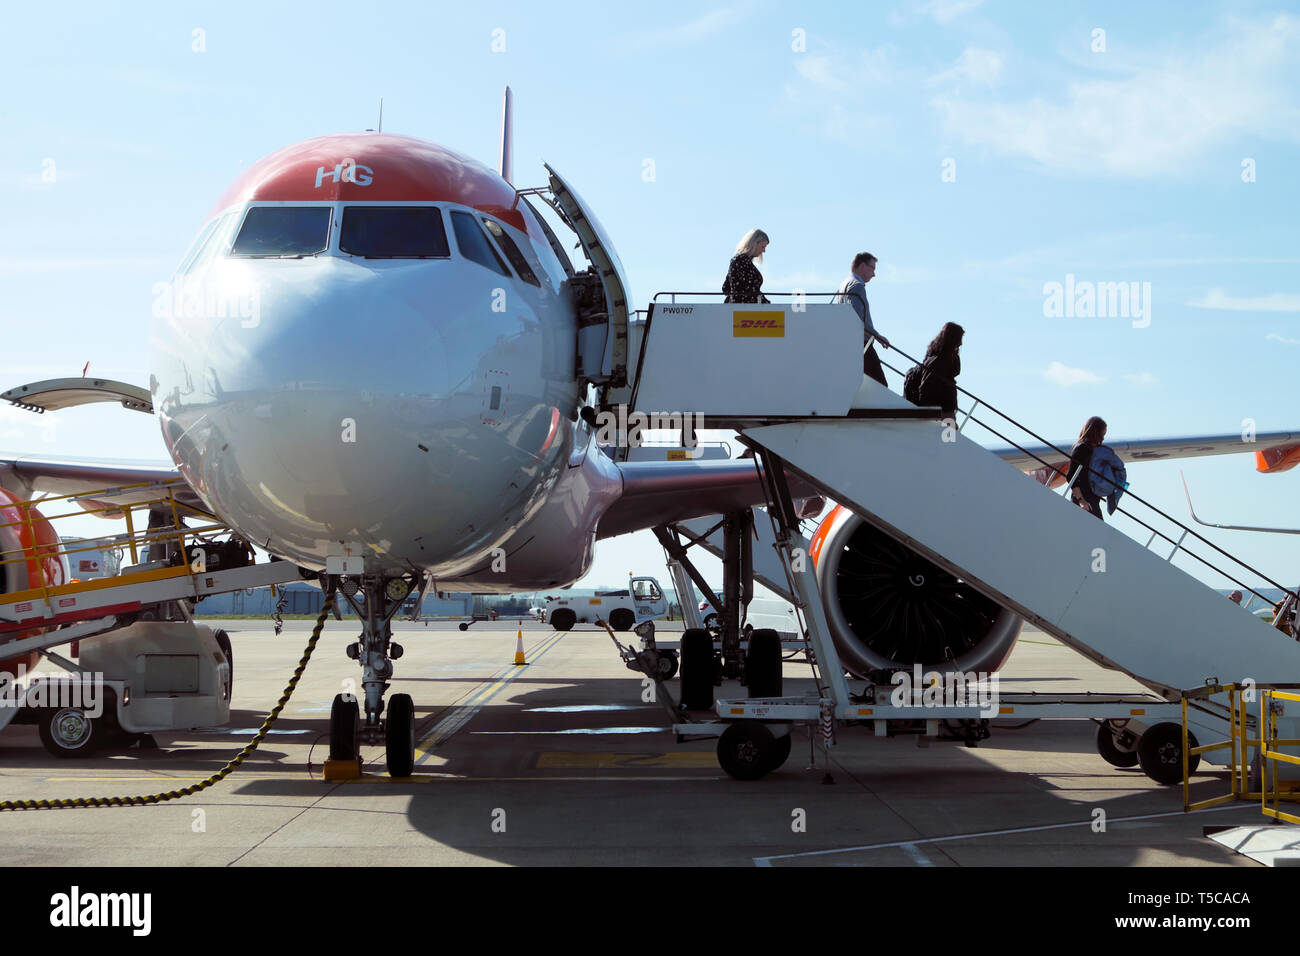 Front side view of passengers getting off leaving an Easyjet aircraft plane on the tarmac at Bristol Airport England UK Great Britain  KATHY DEWITT Stock Photo